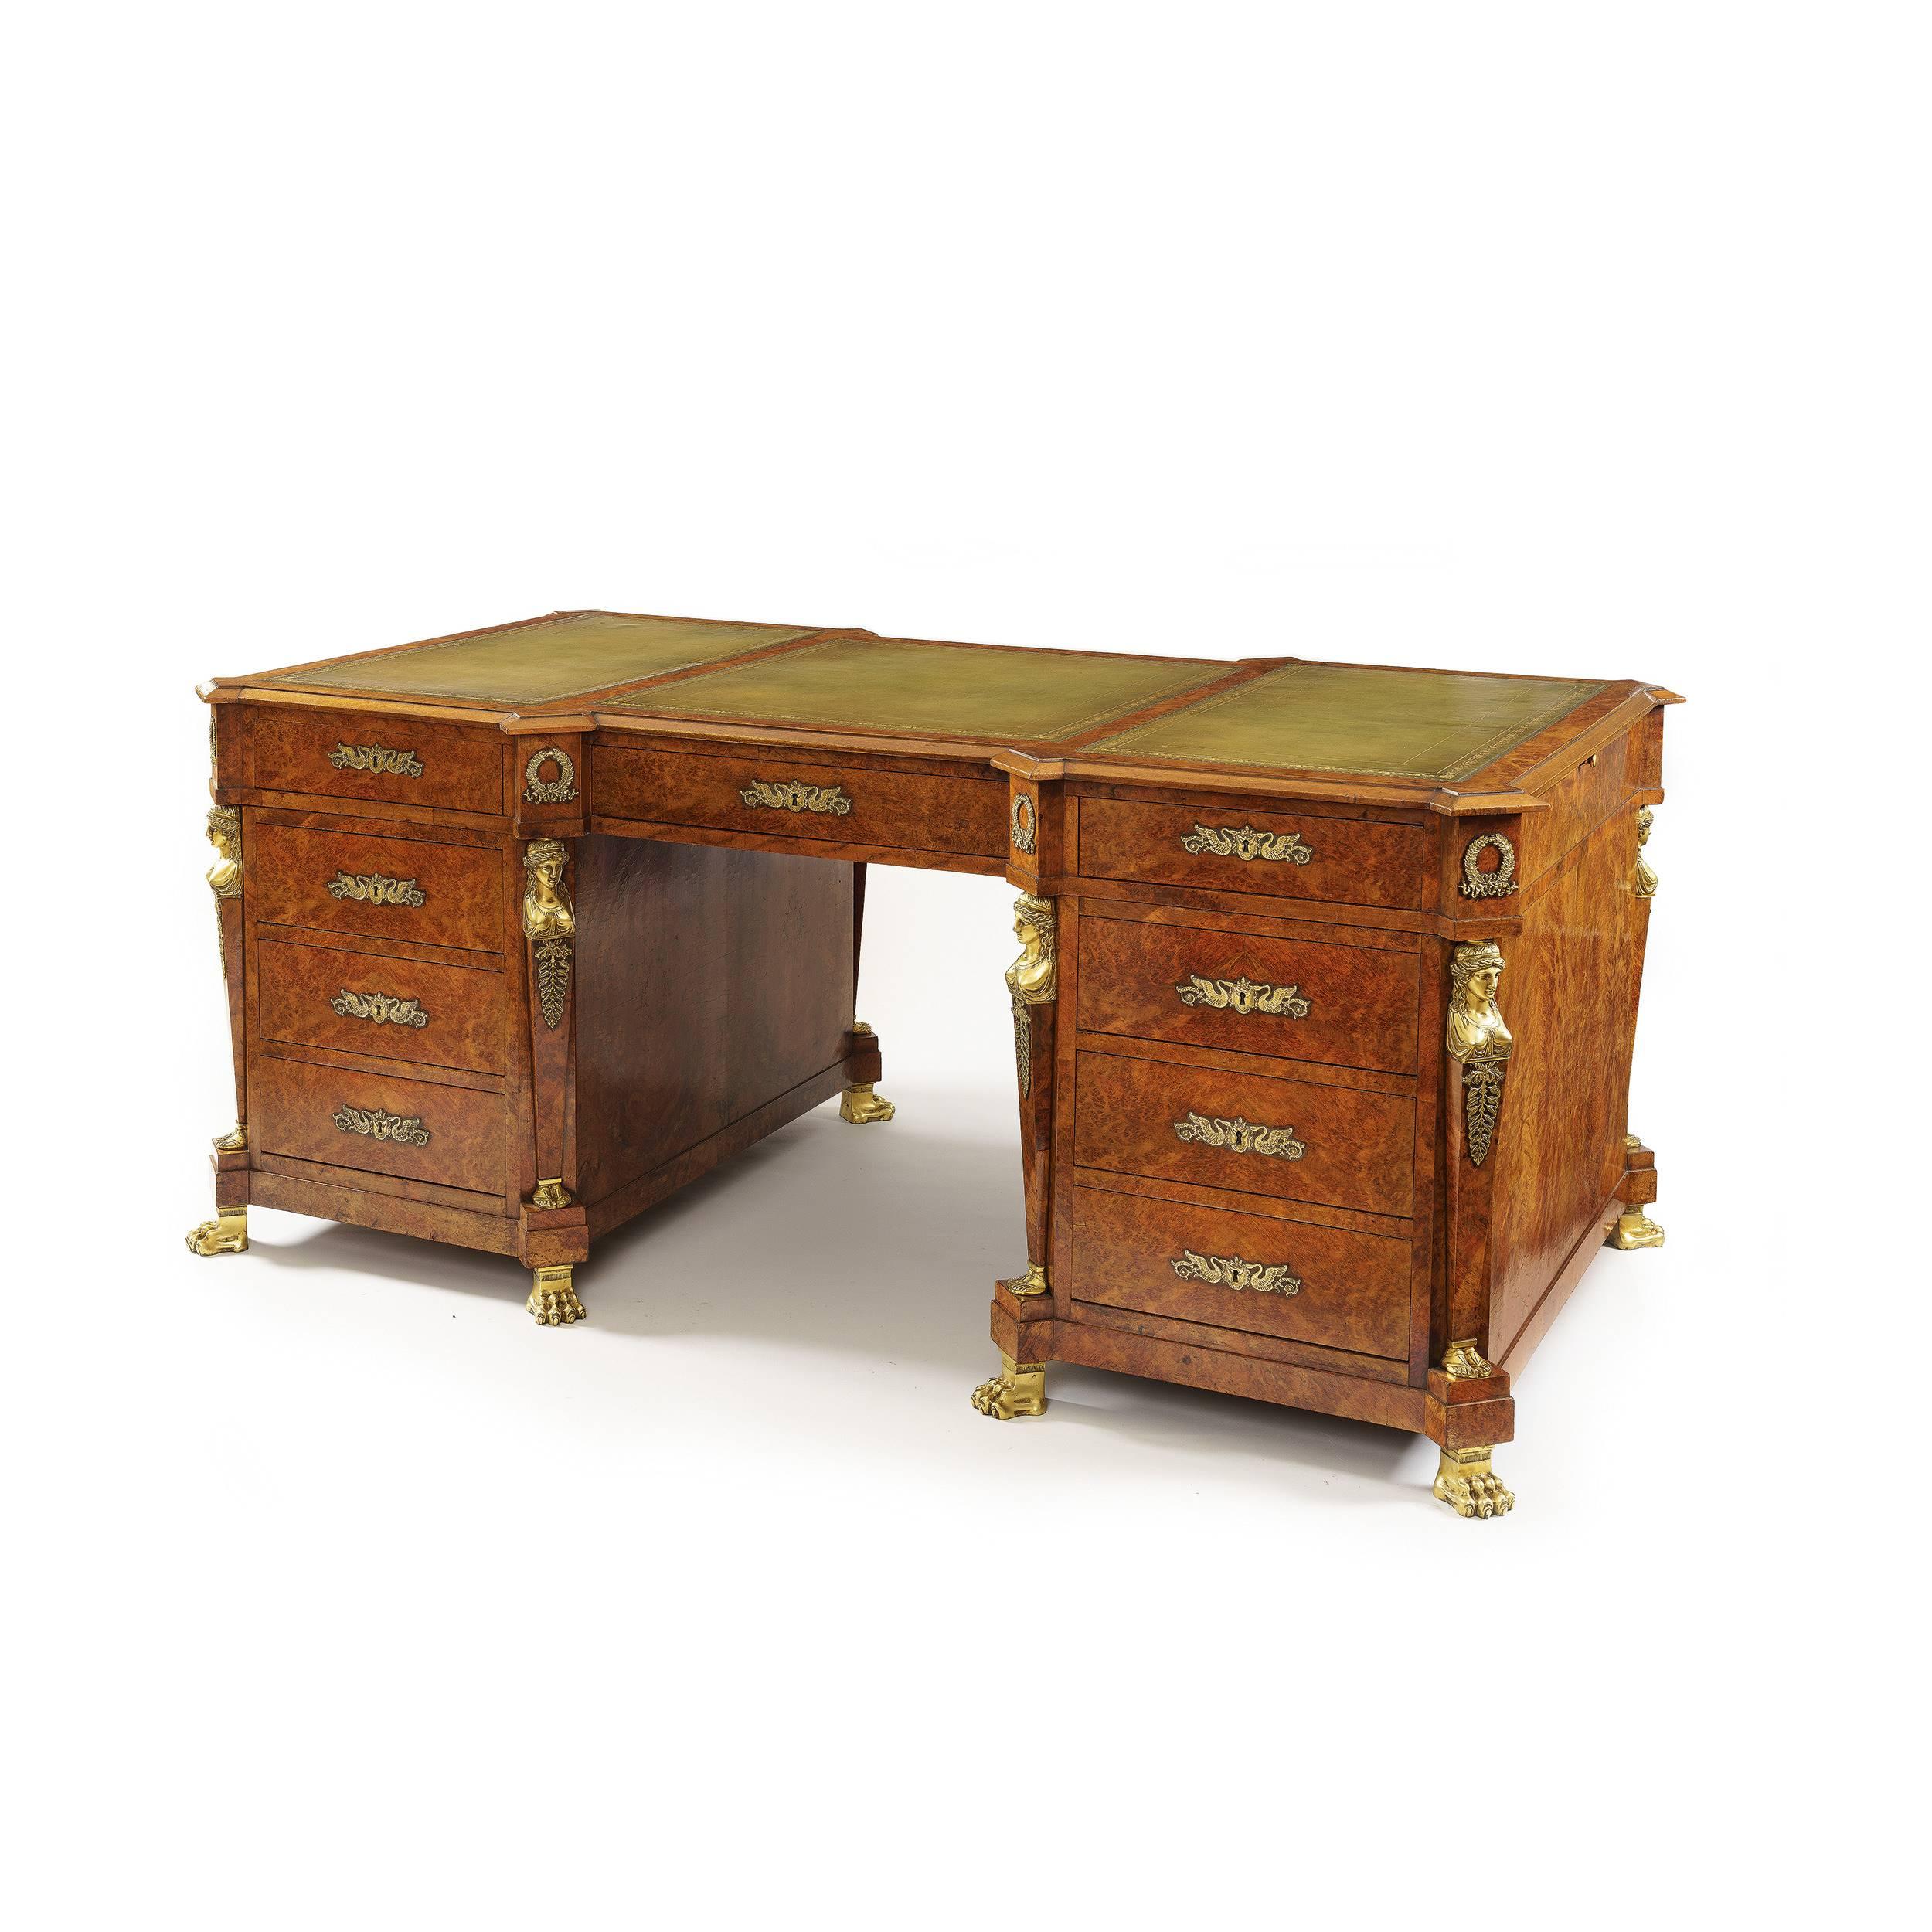 A pedestal desk in the French Empire manner

of freestanding breakfront form with everted angles, constructed in birchwood, and burr birchwood, having bronze accents drawn from the oeuvres of Percier and fontaine; rising from bronze lions' paw